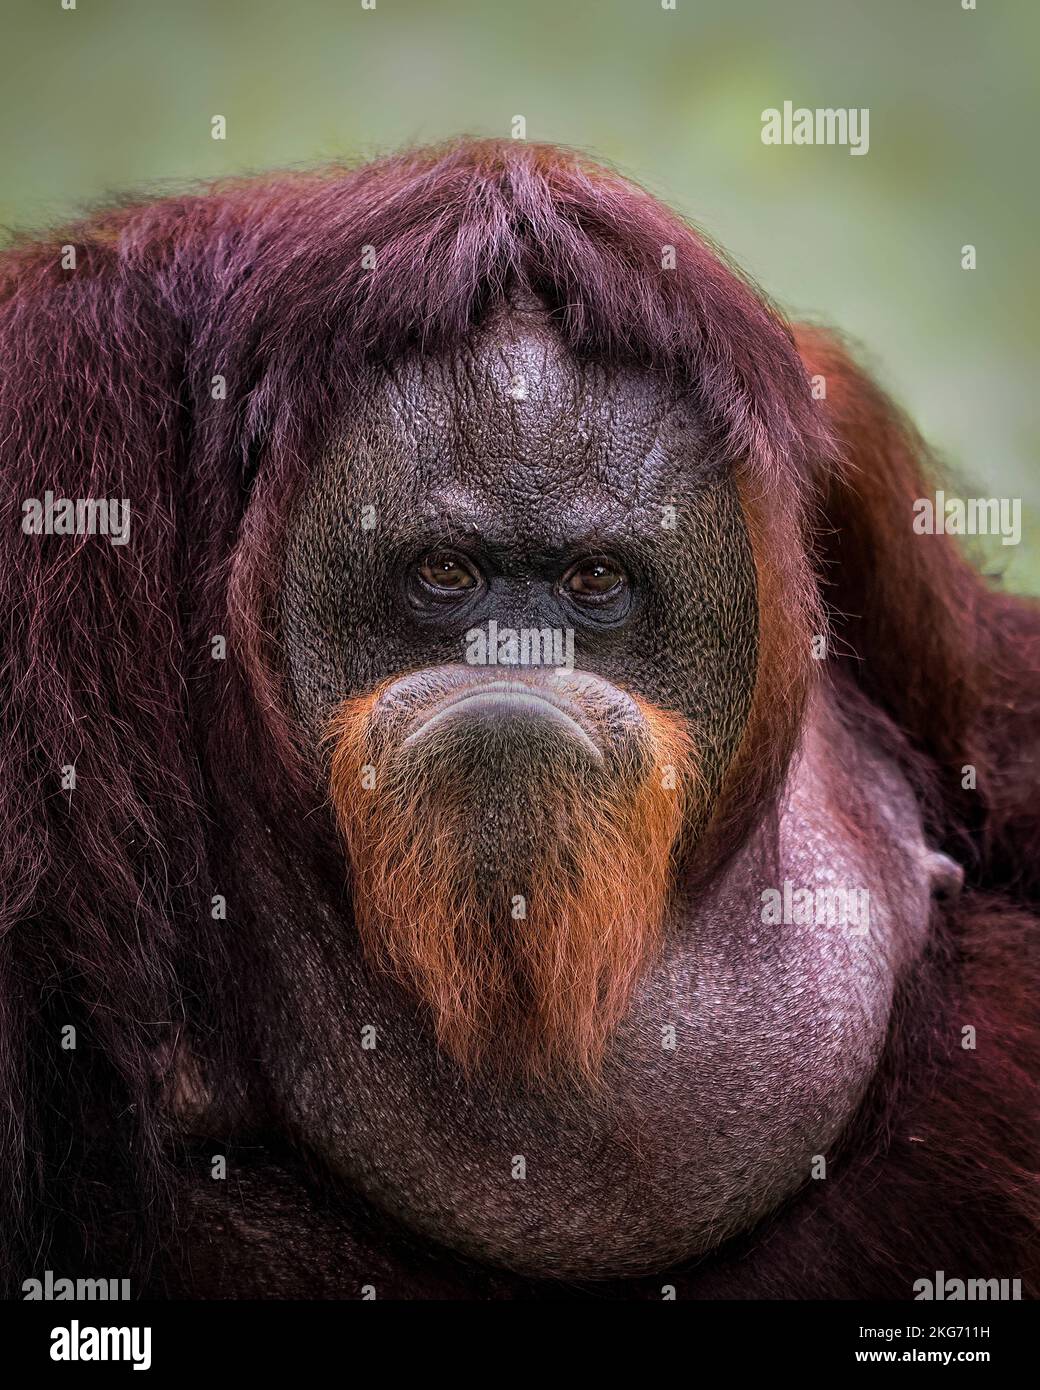 Puffing up his lip to cover his nose. Jakarta, Indonesia: THESE FUNNY photos show an orangutan pulling silly faces for a delighted photographer. One i Stock Photo